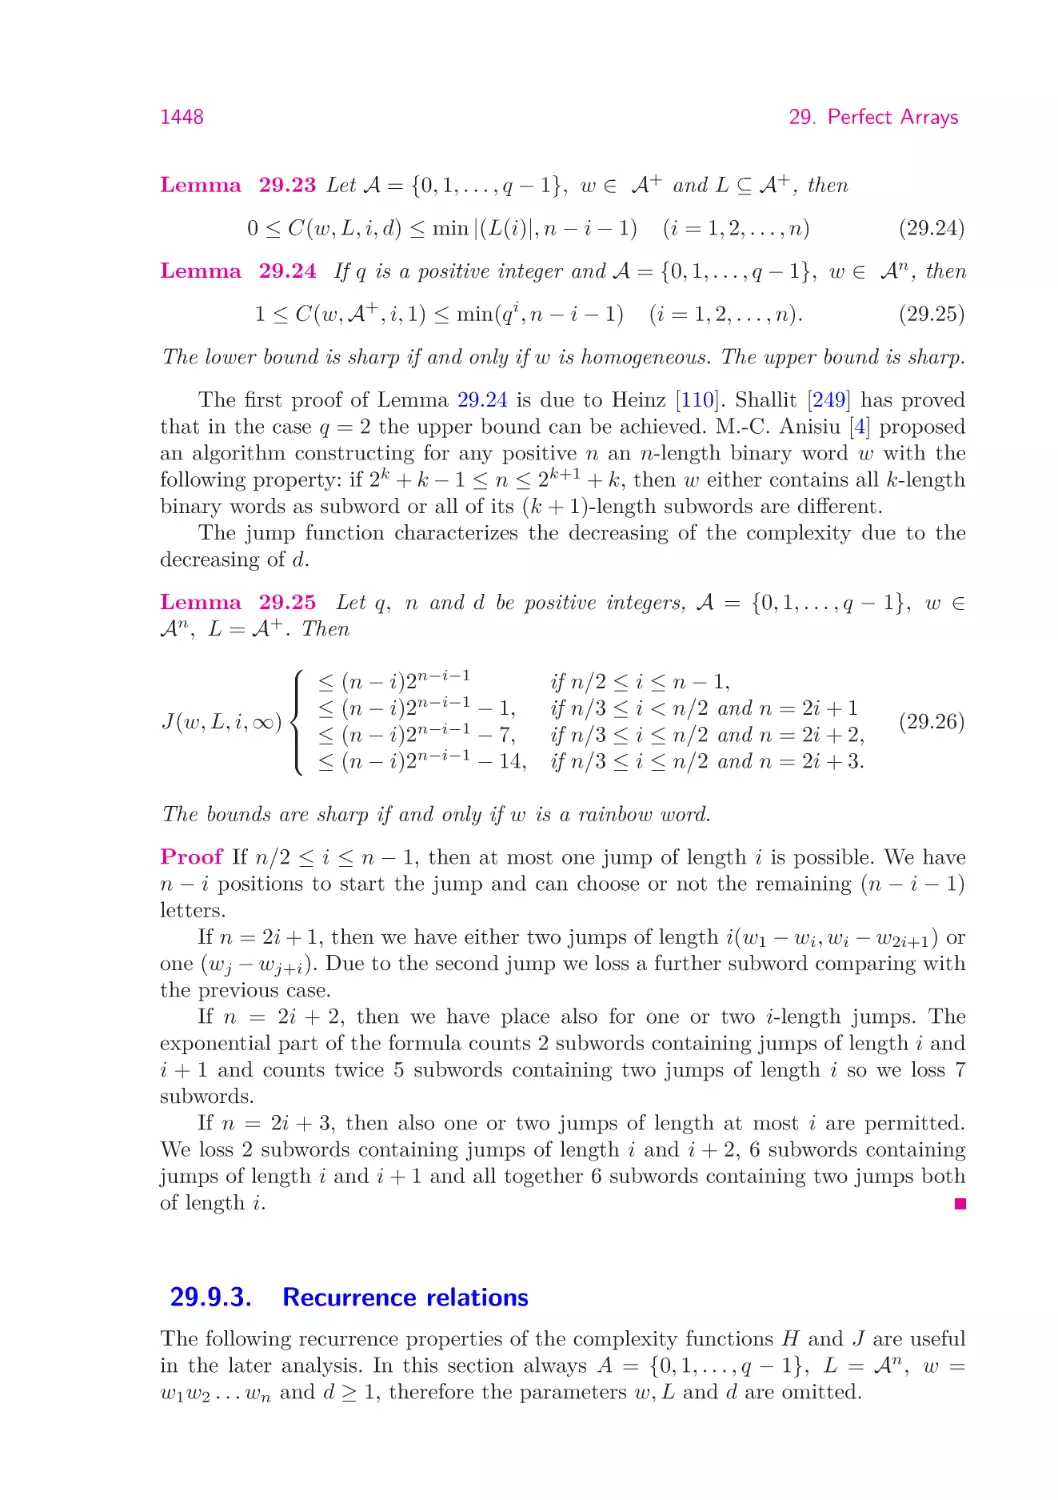 29.9.3.   Recurrence relations